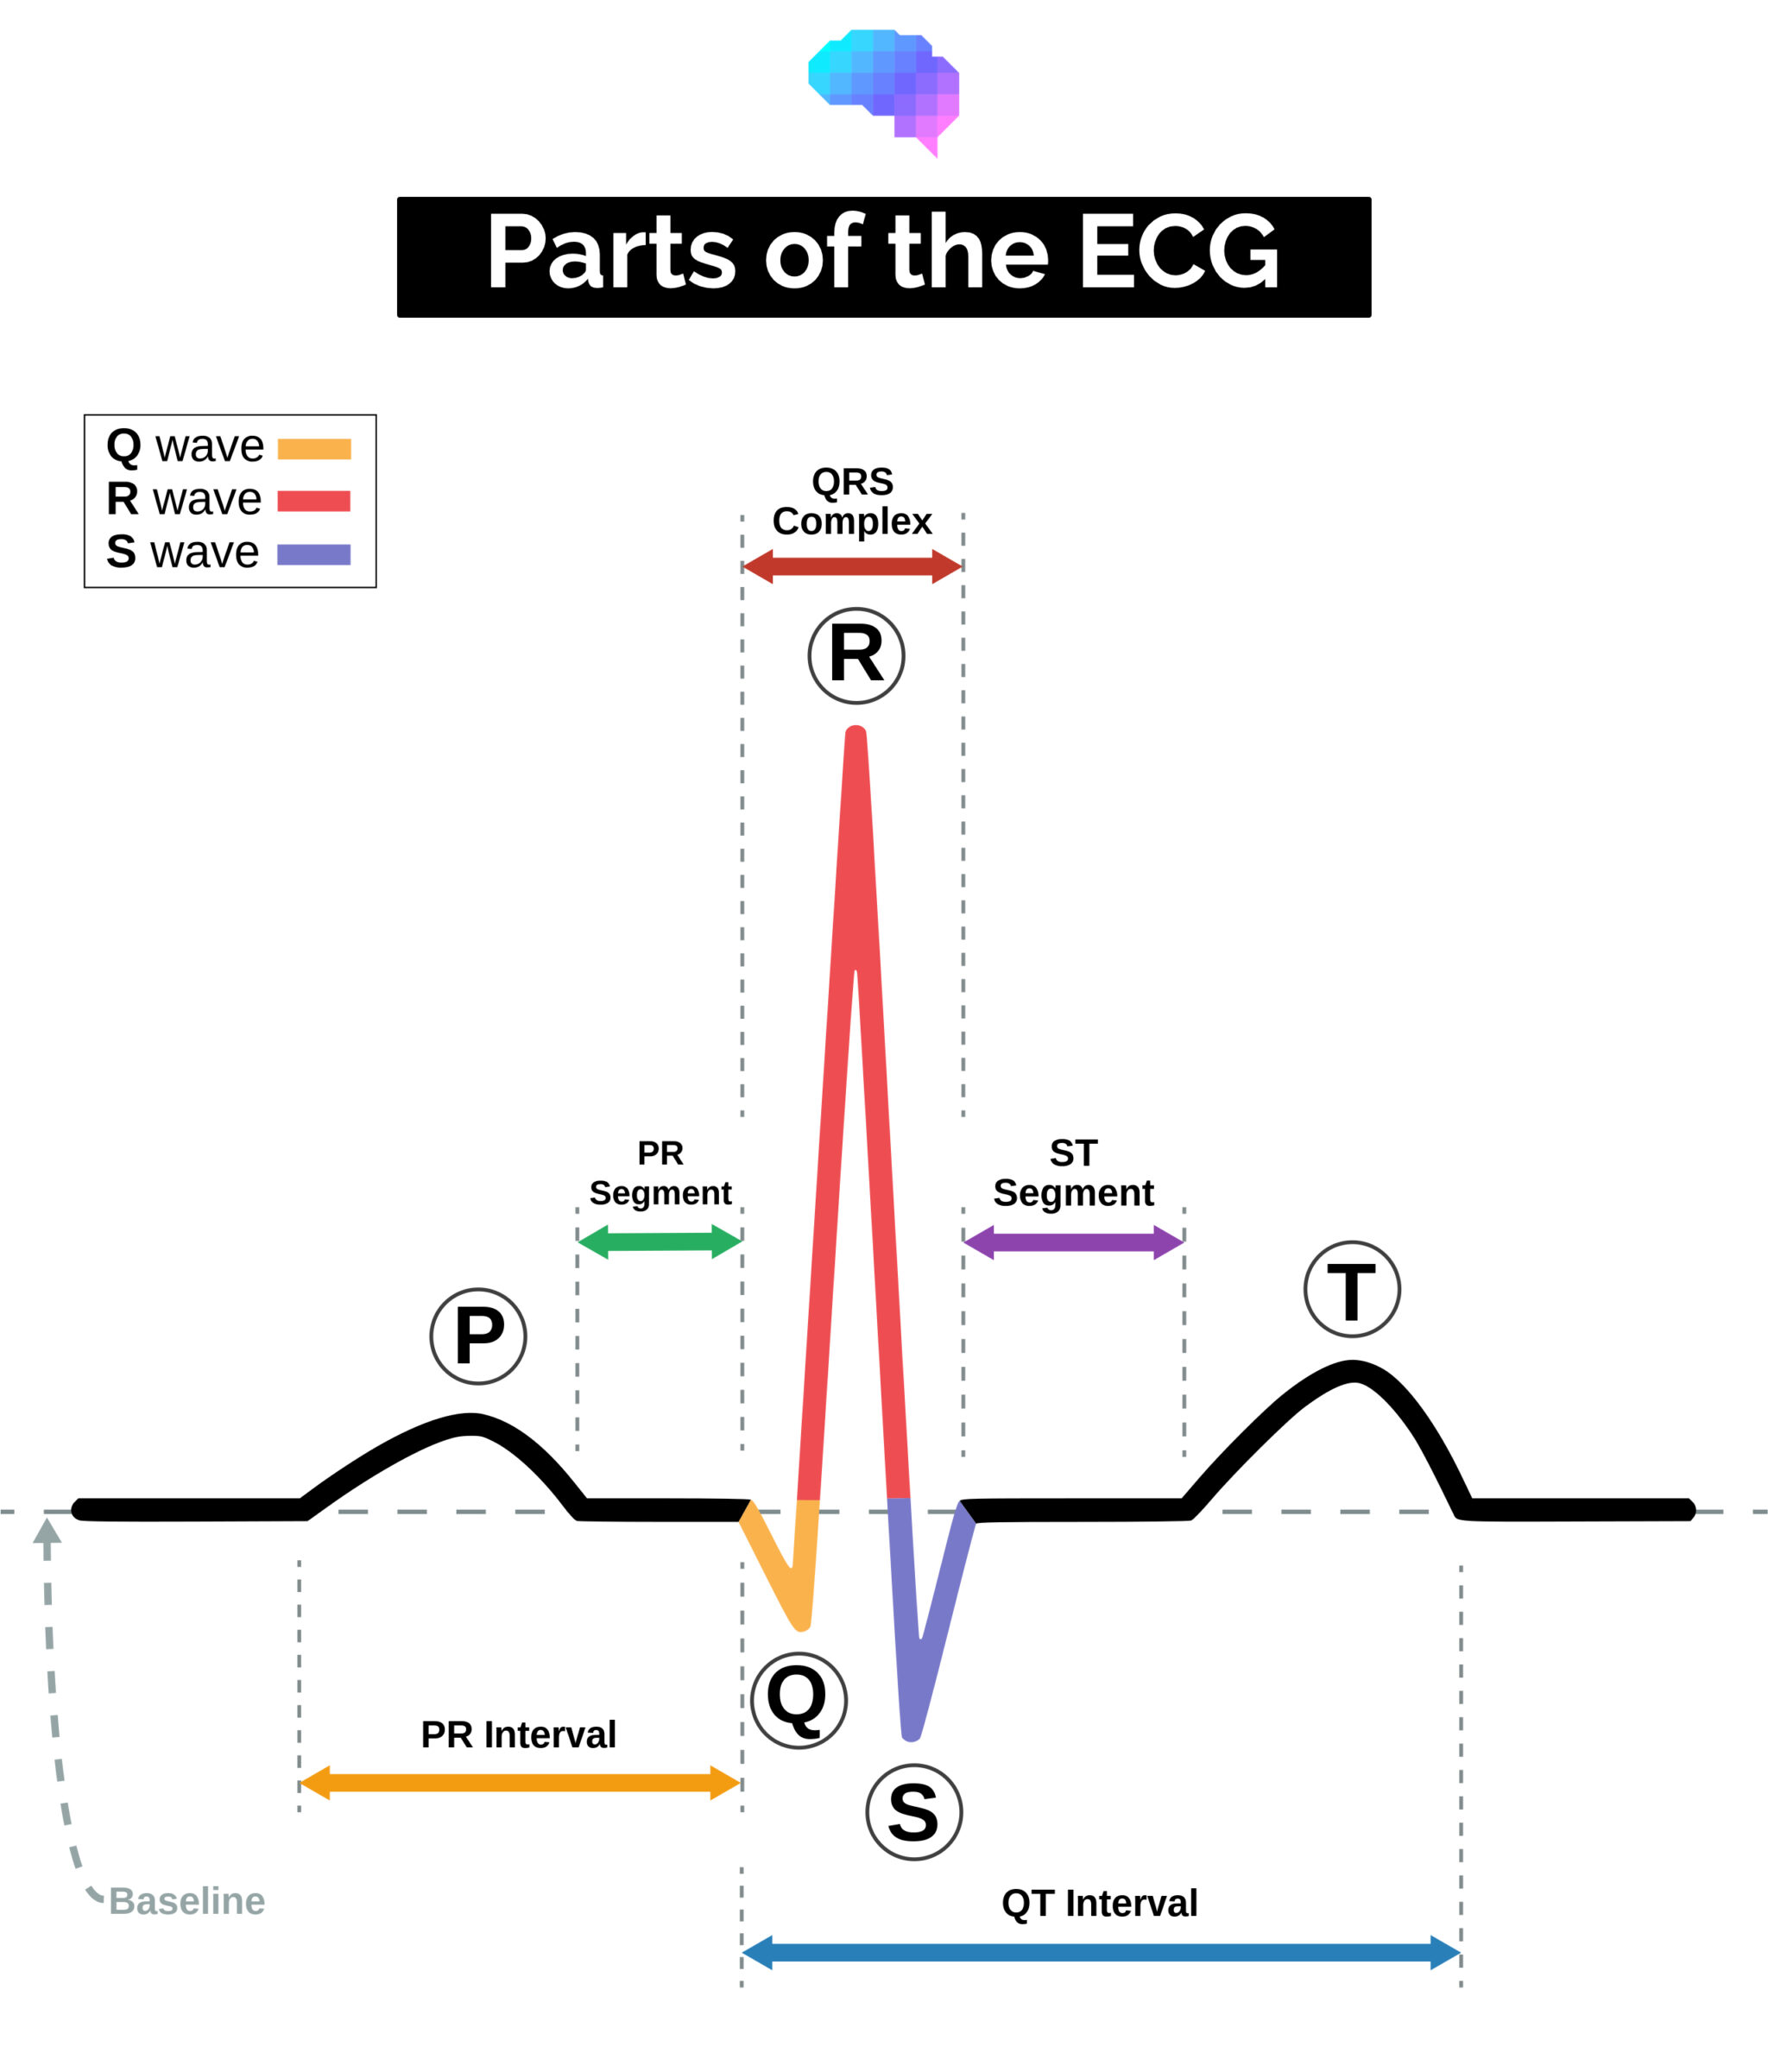 Parts of the ECG